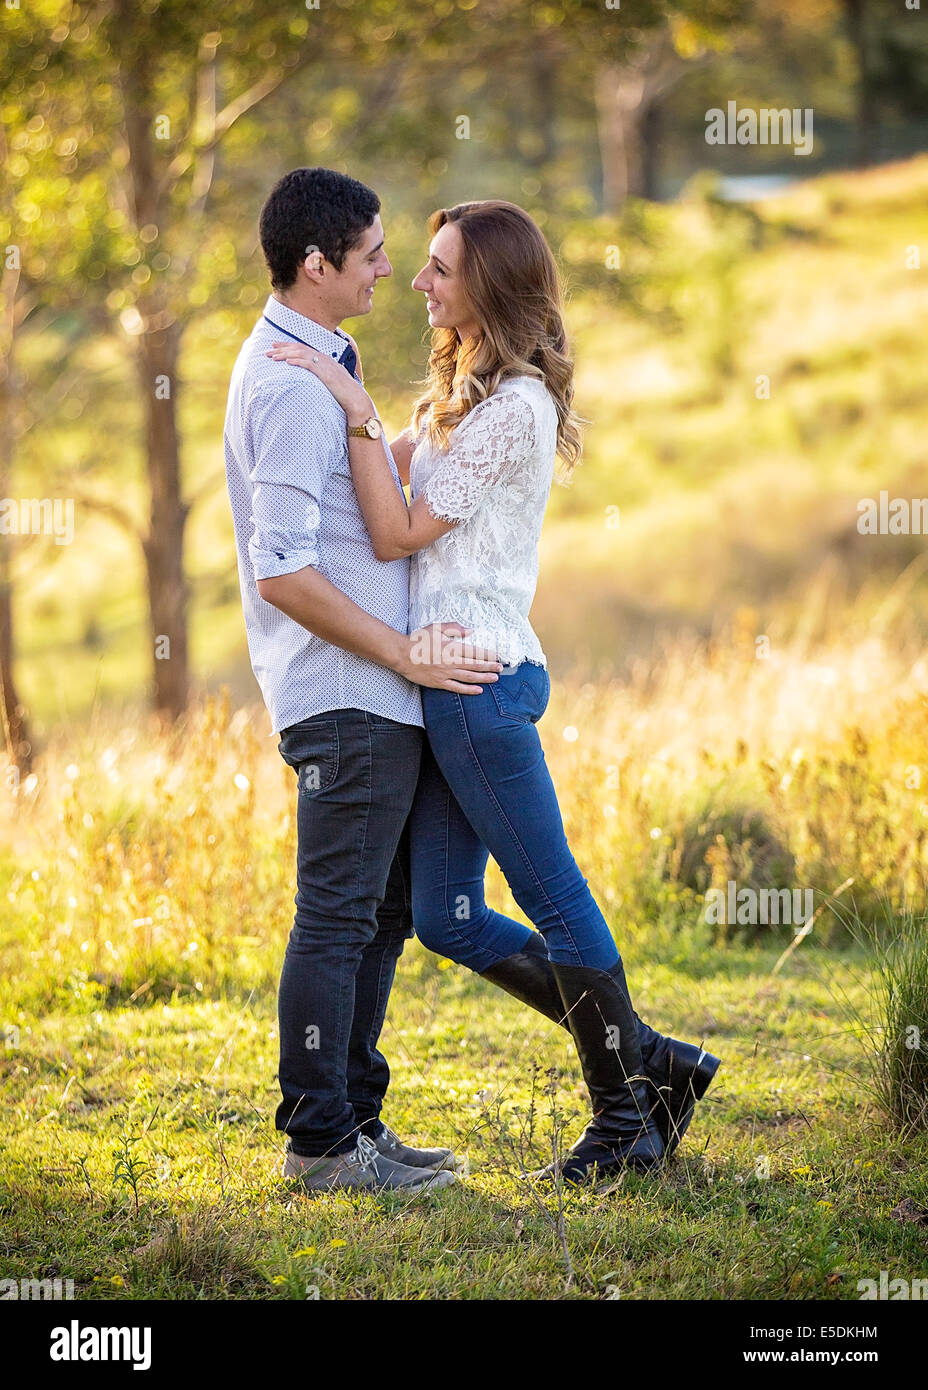 young couple standing in embrace in a rural setting Stock Photo